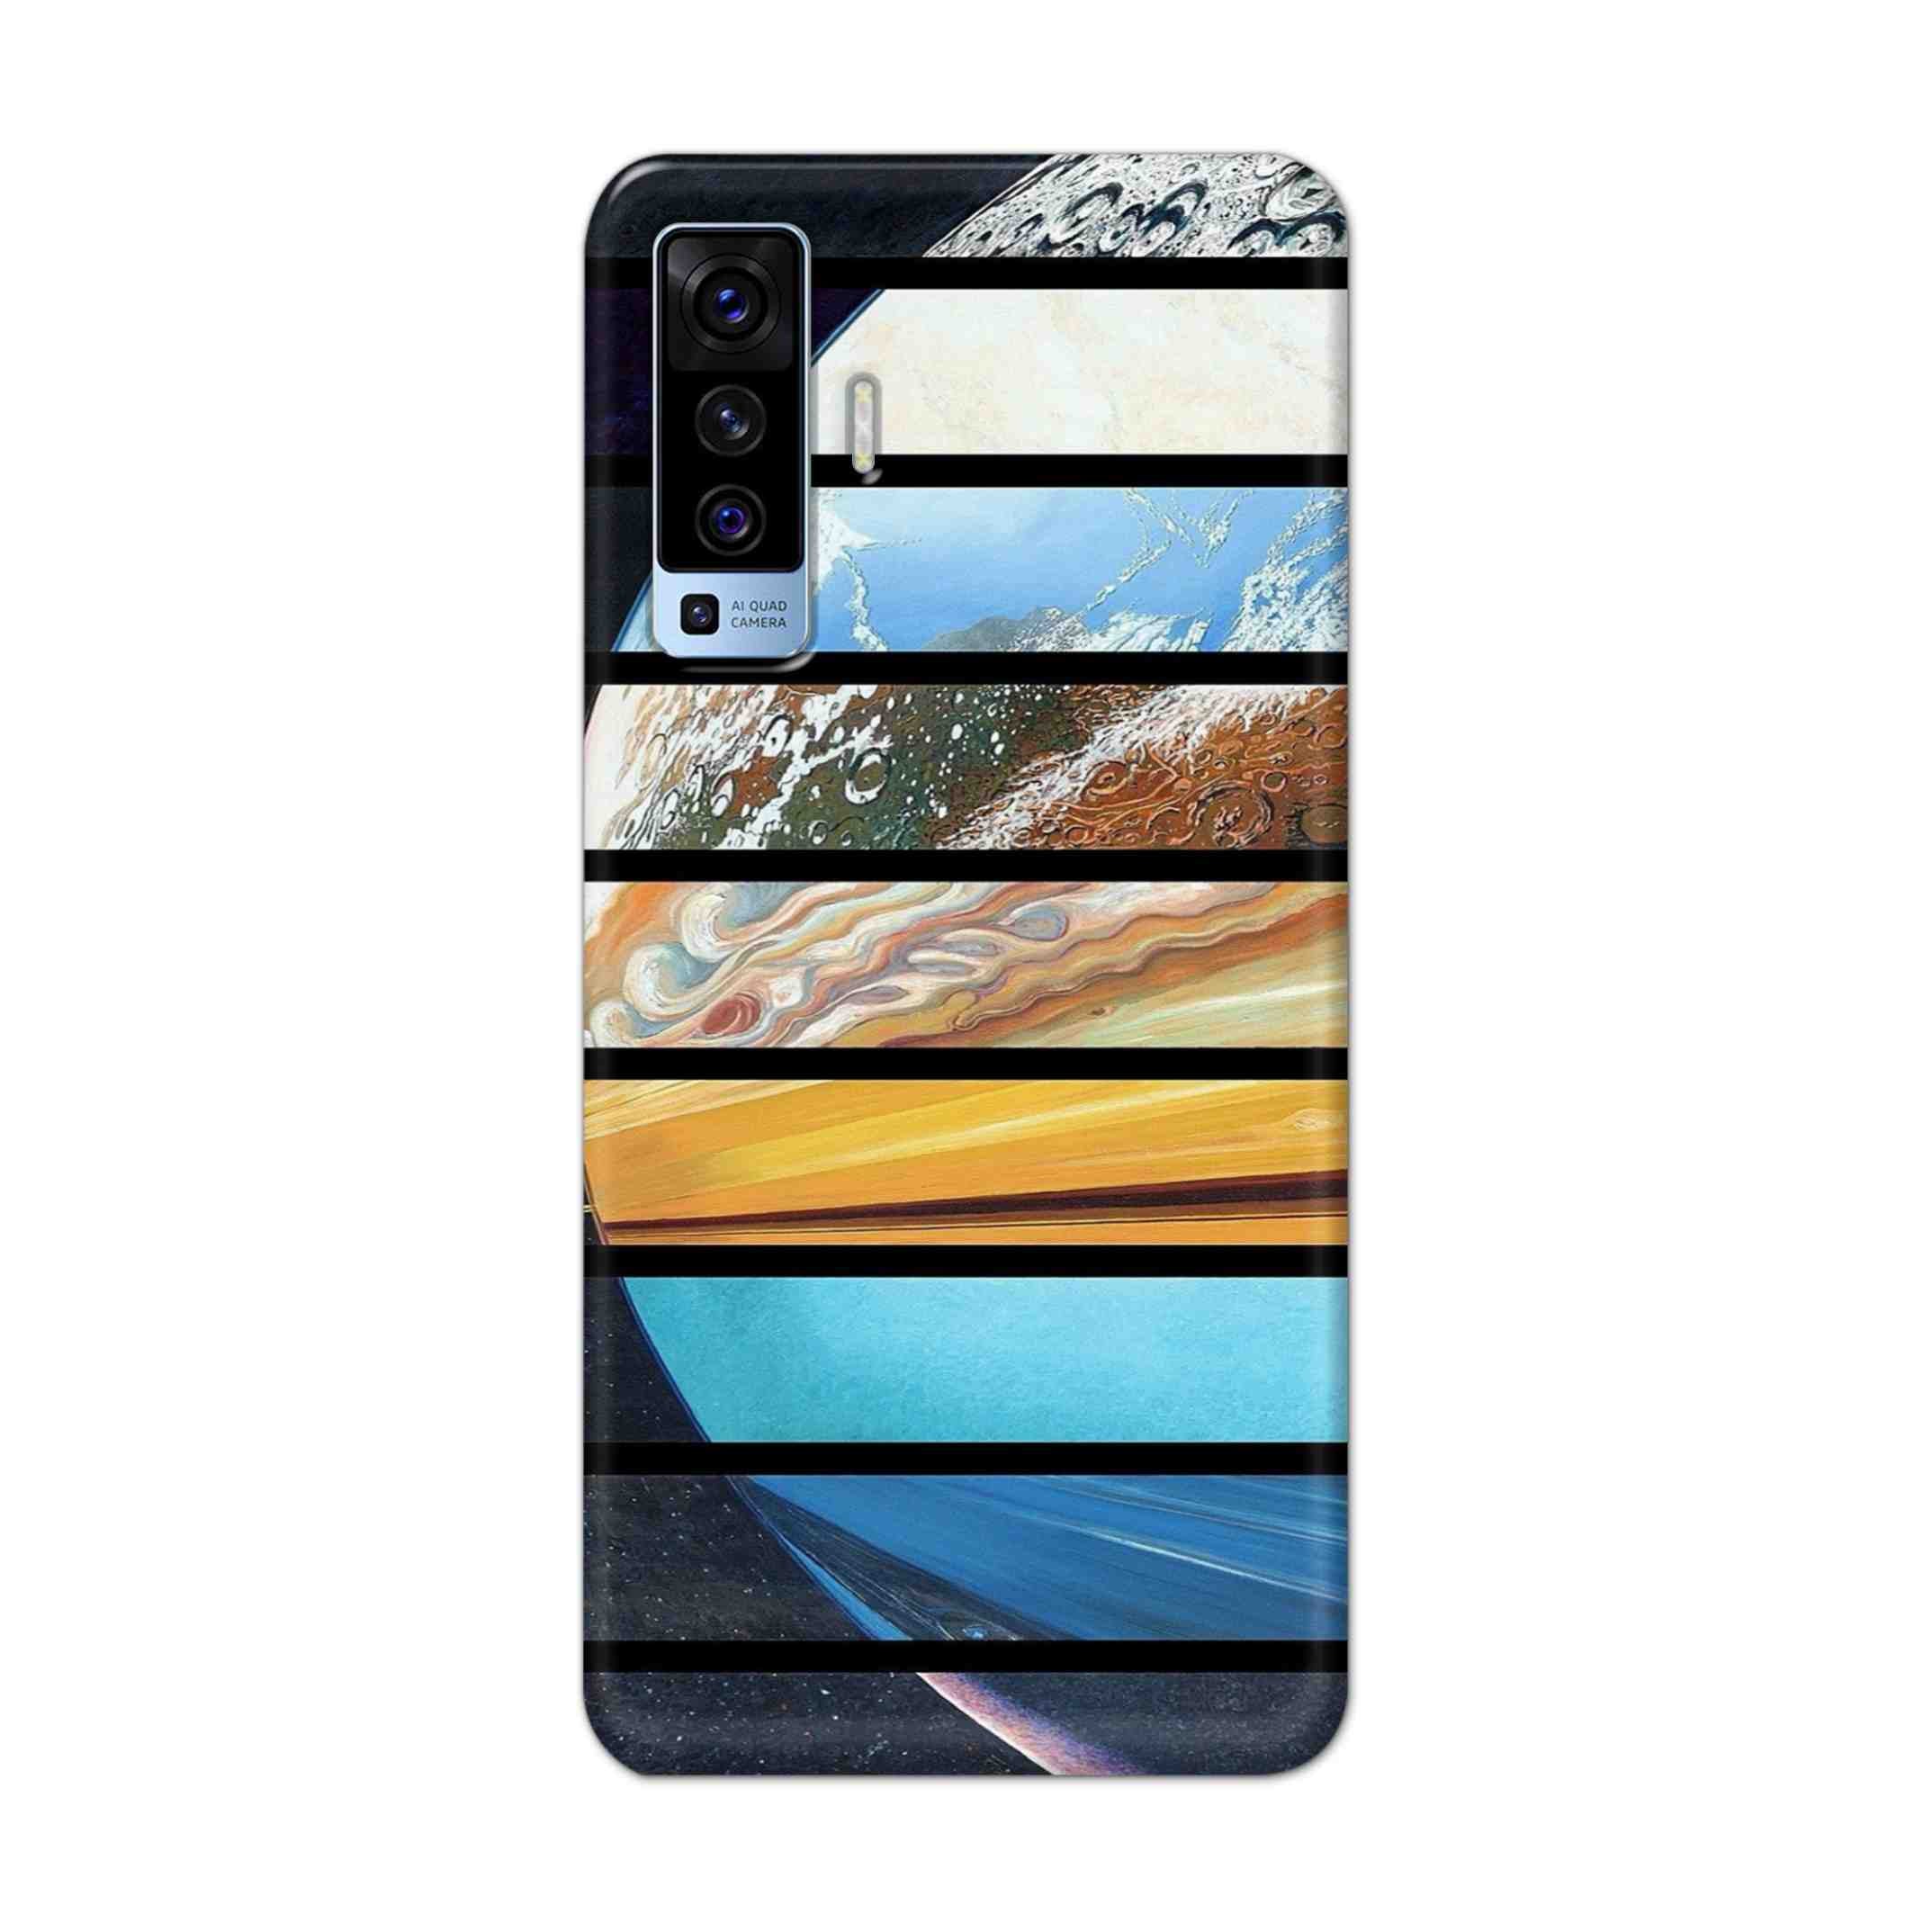 Buy Colourful Earth Hard Back Mobile Phone Case Cover For Vivo X50 Online